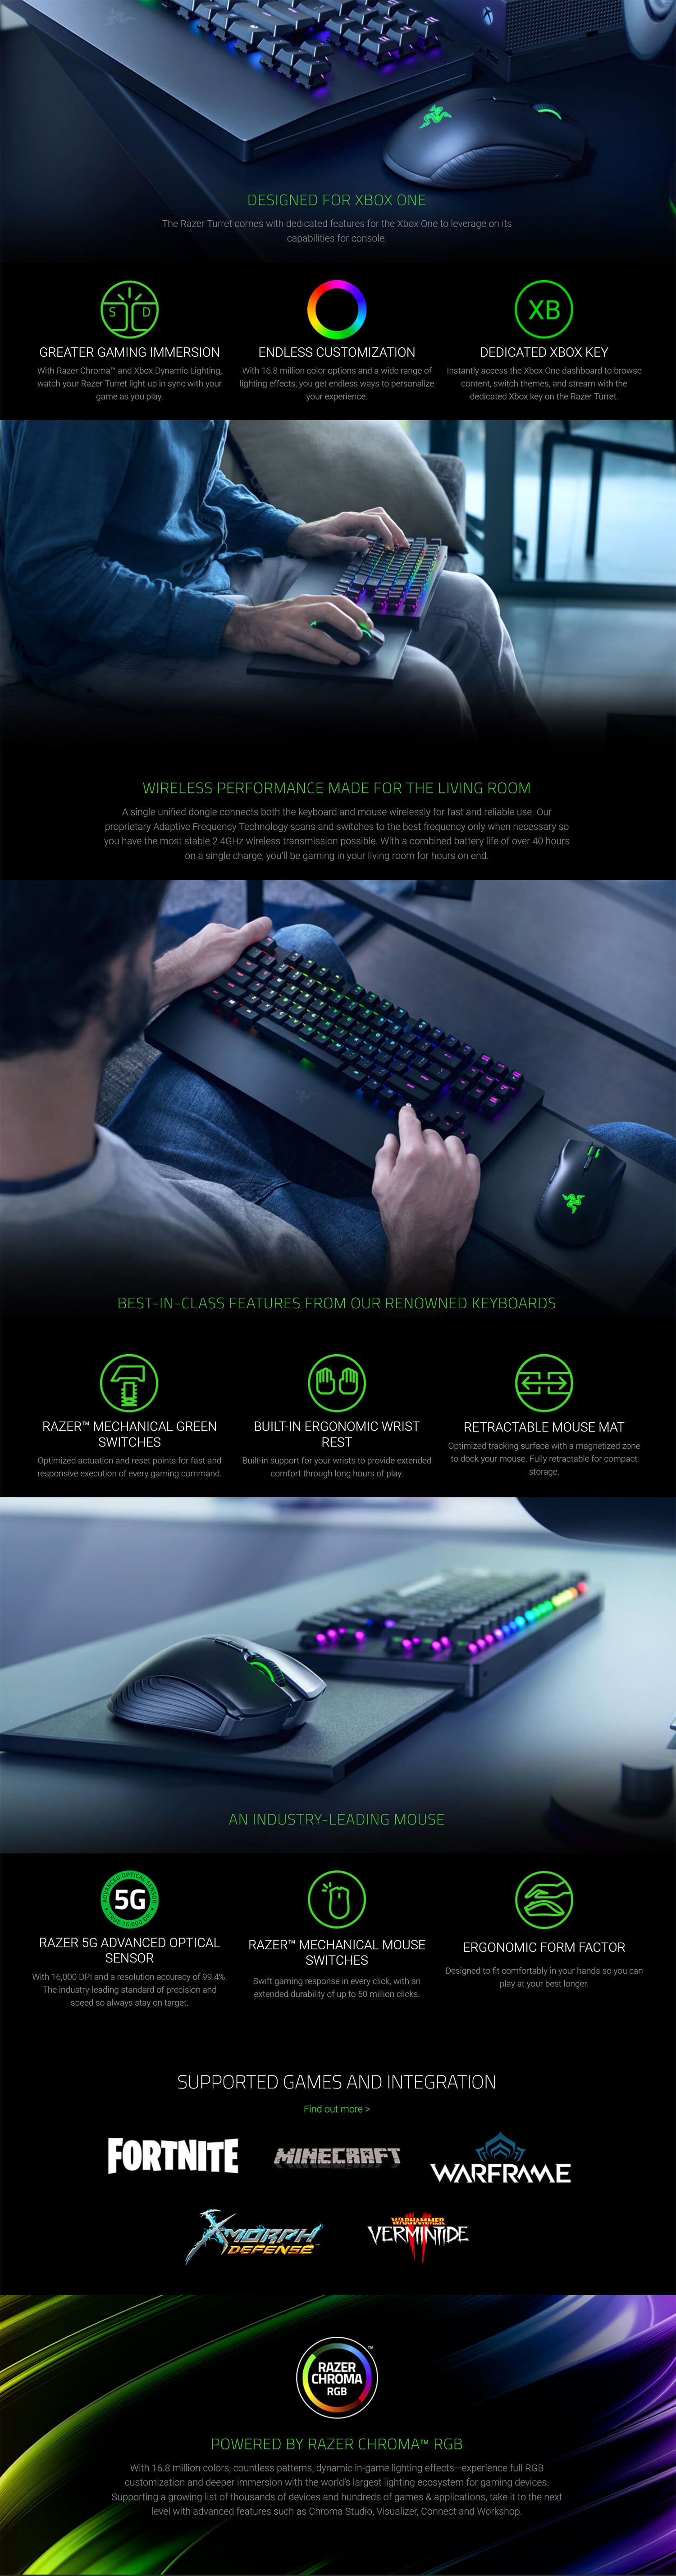 Razer Turret for Xbox One Wireless Keyboard and Mouse RZ84-02820100-B3M1 Details